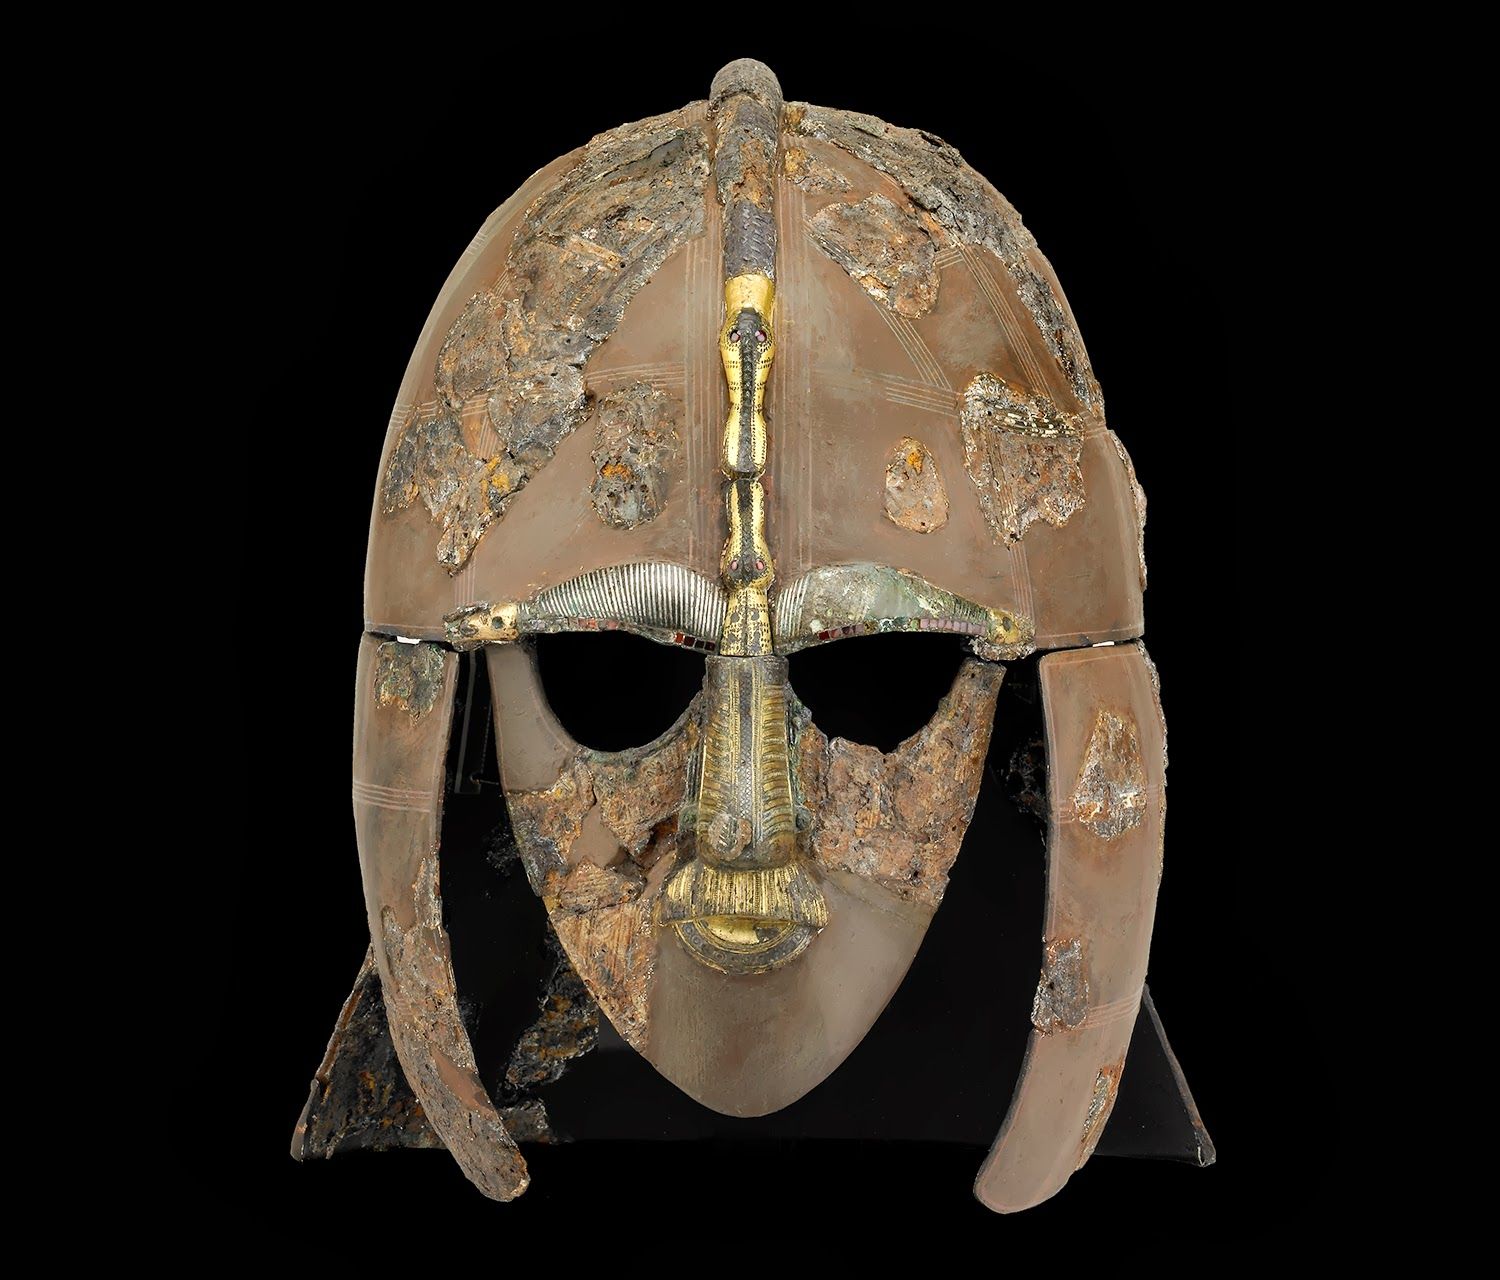 The Sutton Hoo Helmet by Unknown Artist - early 600 - 31,5 x 25,5 x 21,5 cm British Museum